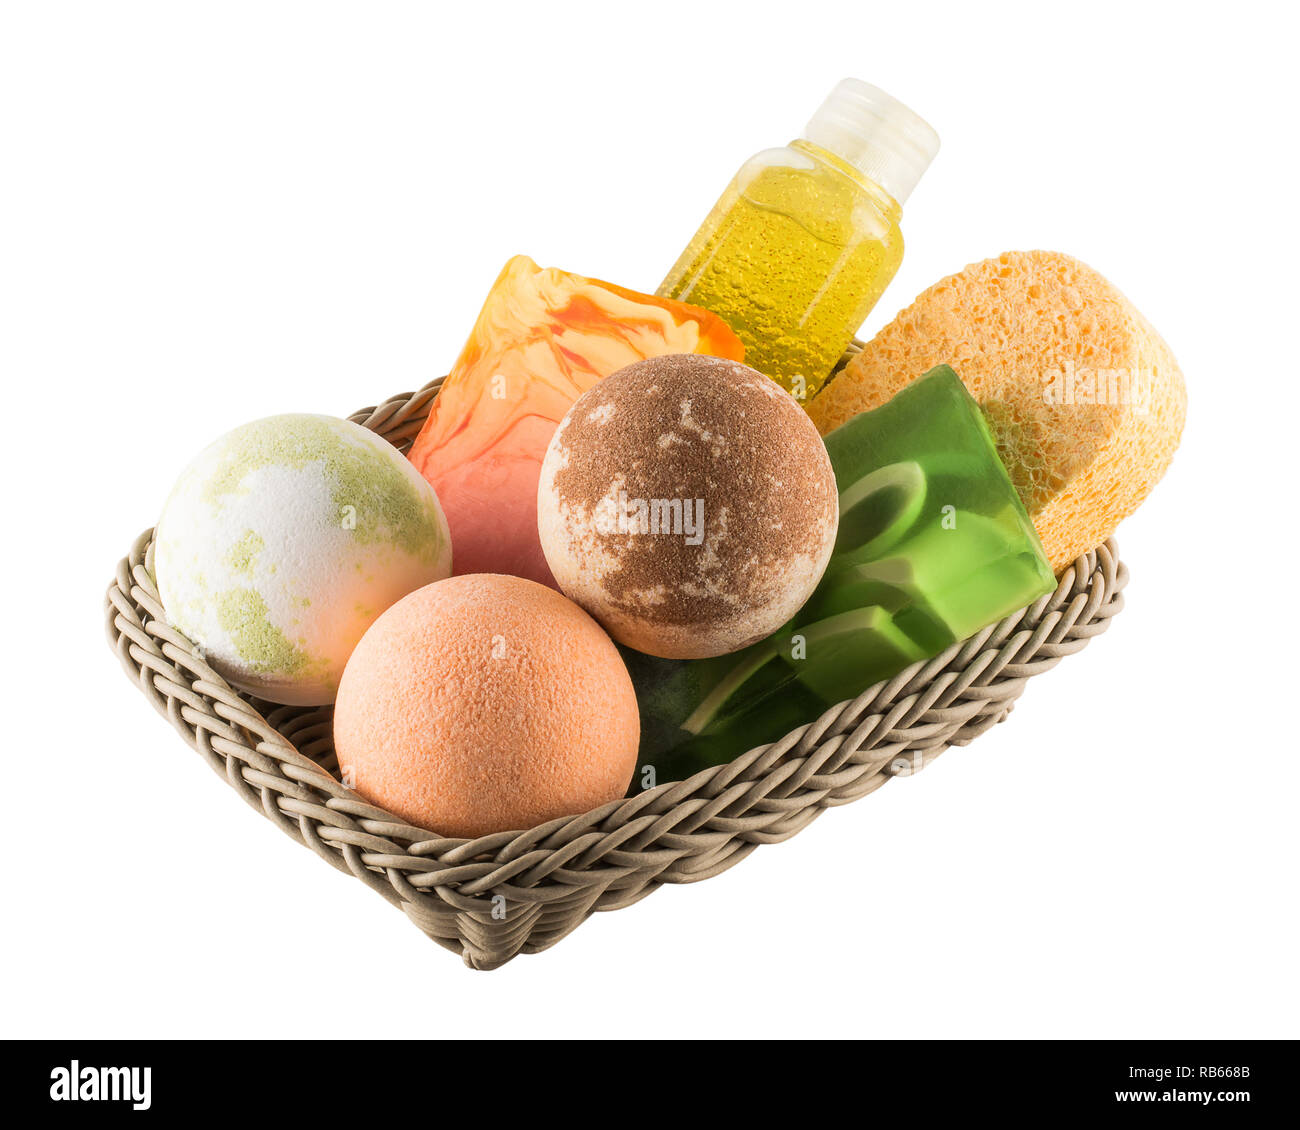 Сosmetic bath products lying in the basket Stock Photo